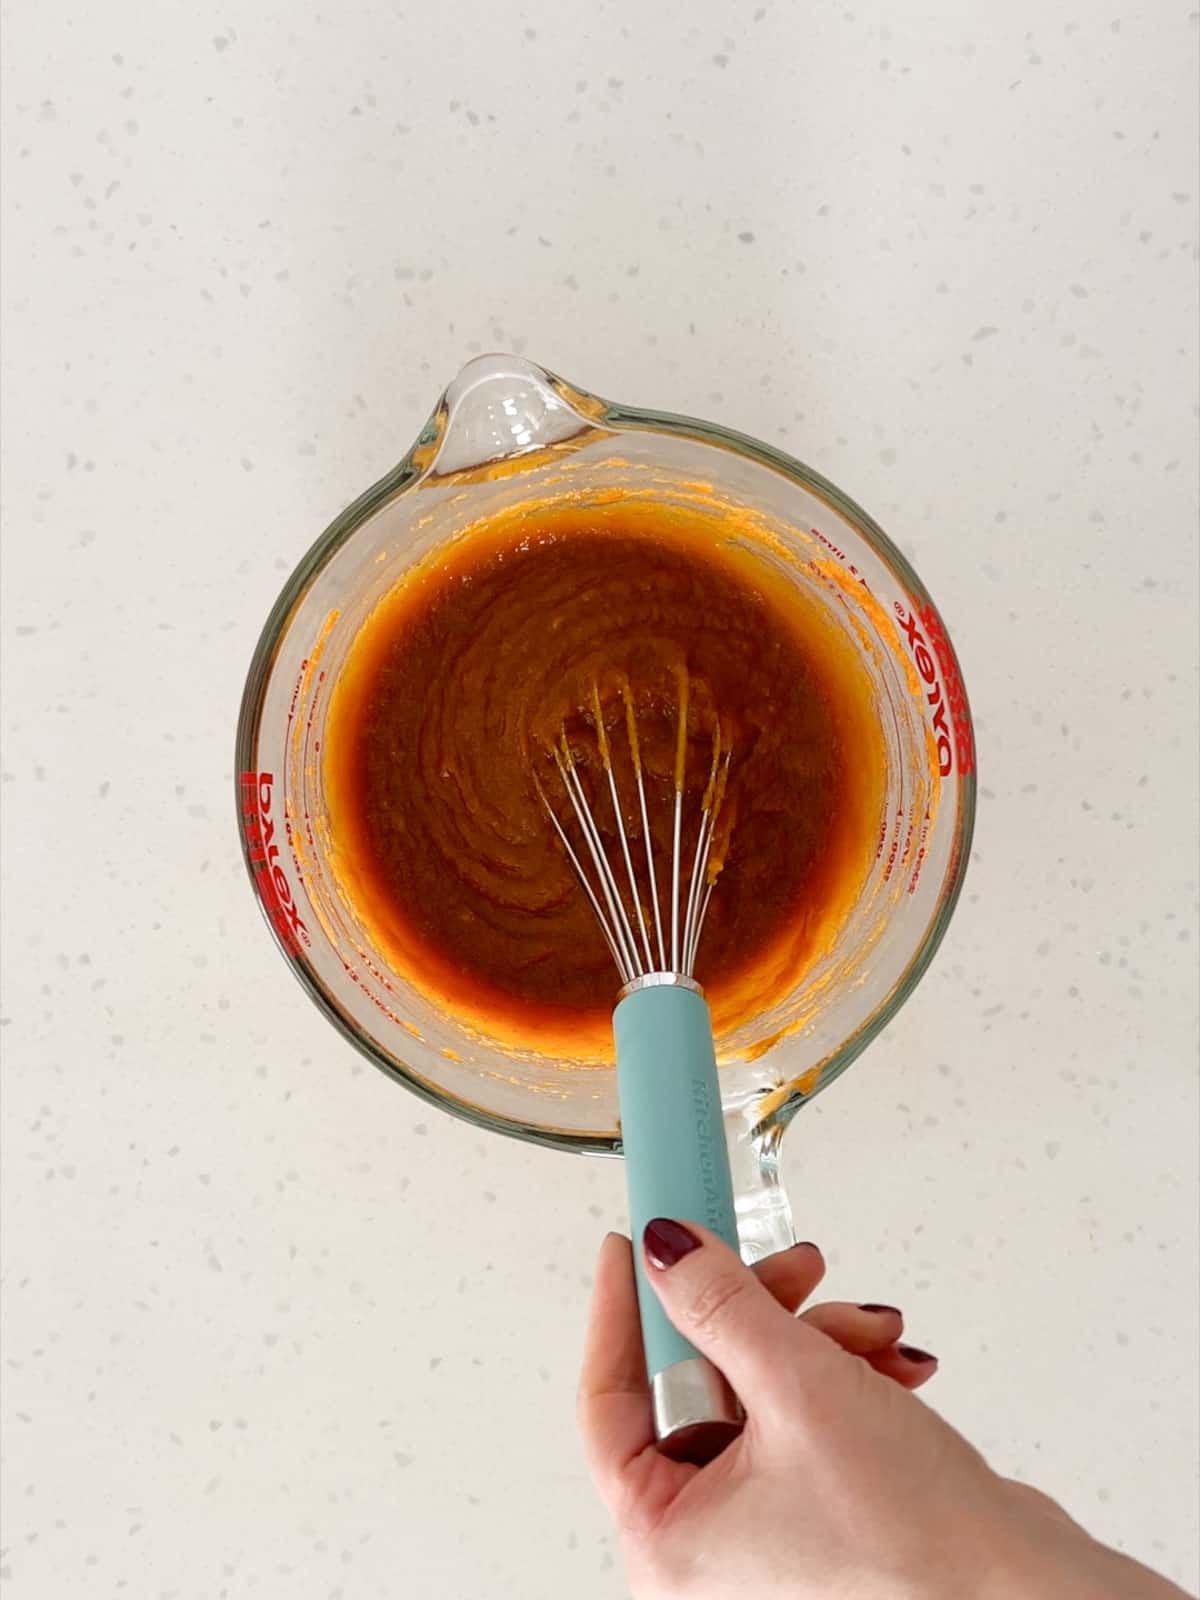 Pumpkin puree, eggs, brown sugar, and cane sugar are whisked together.